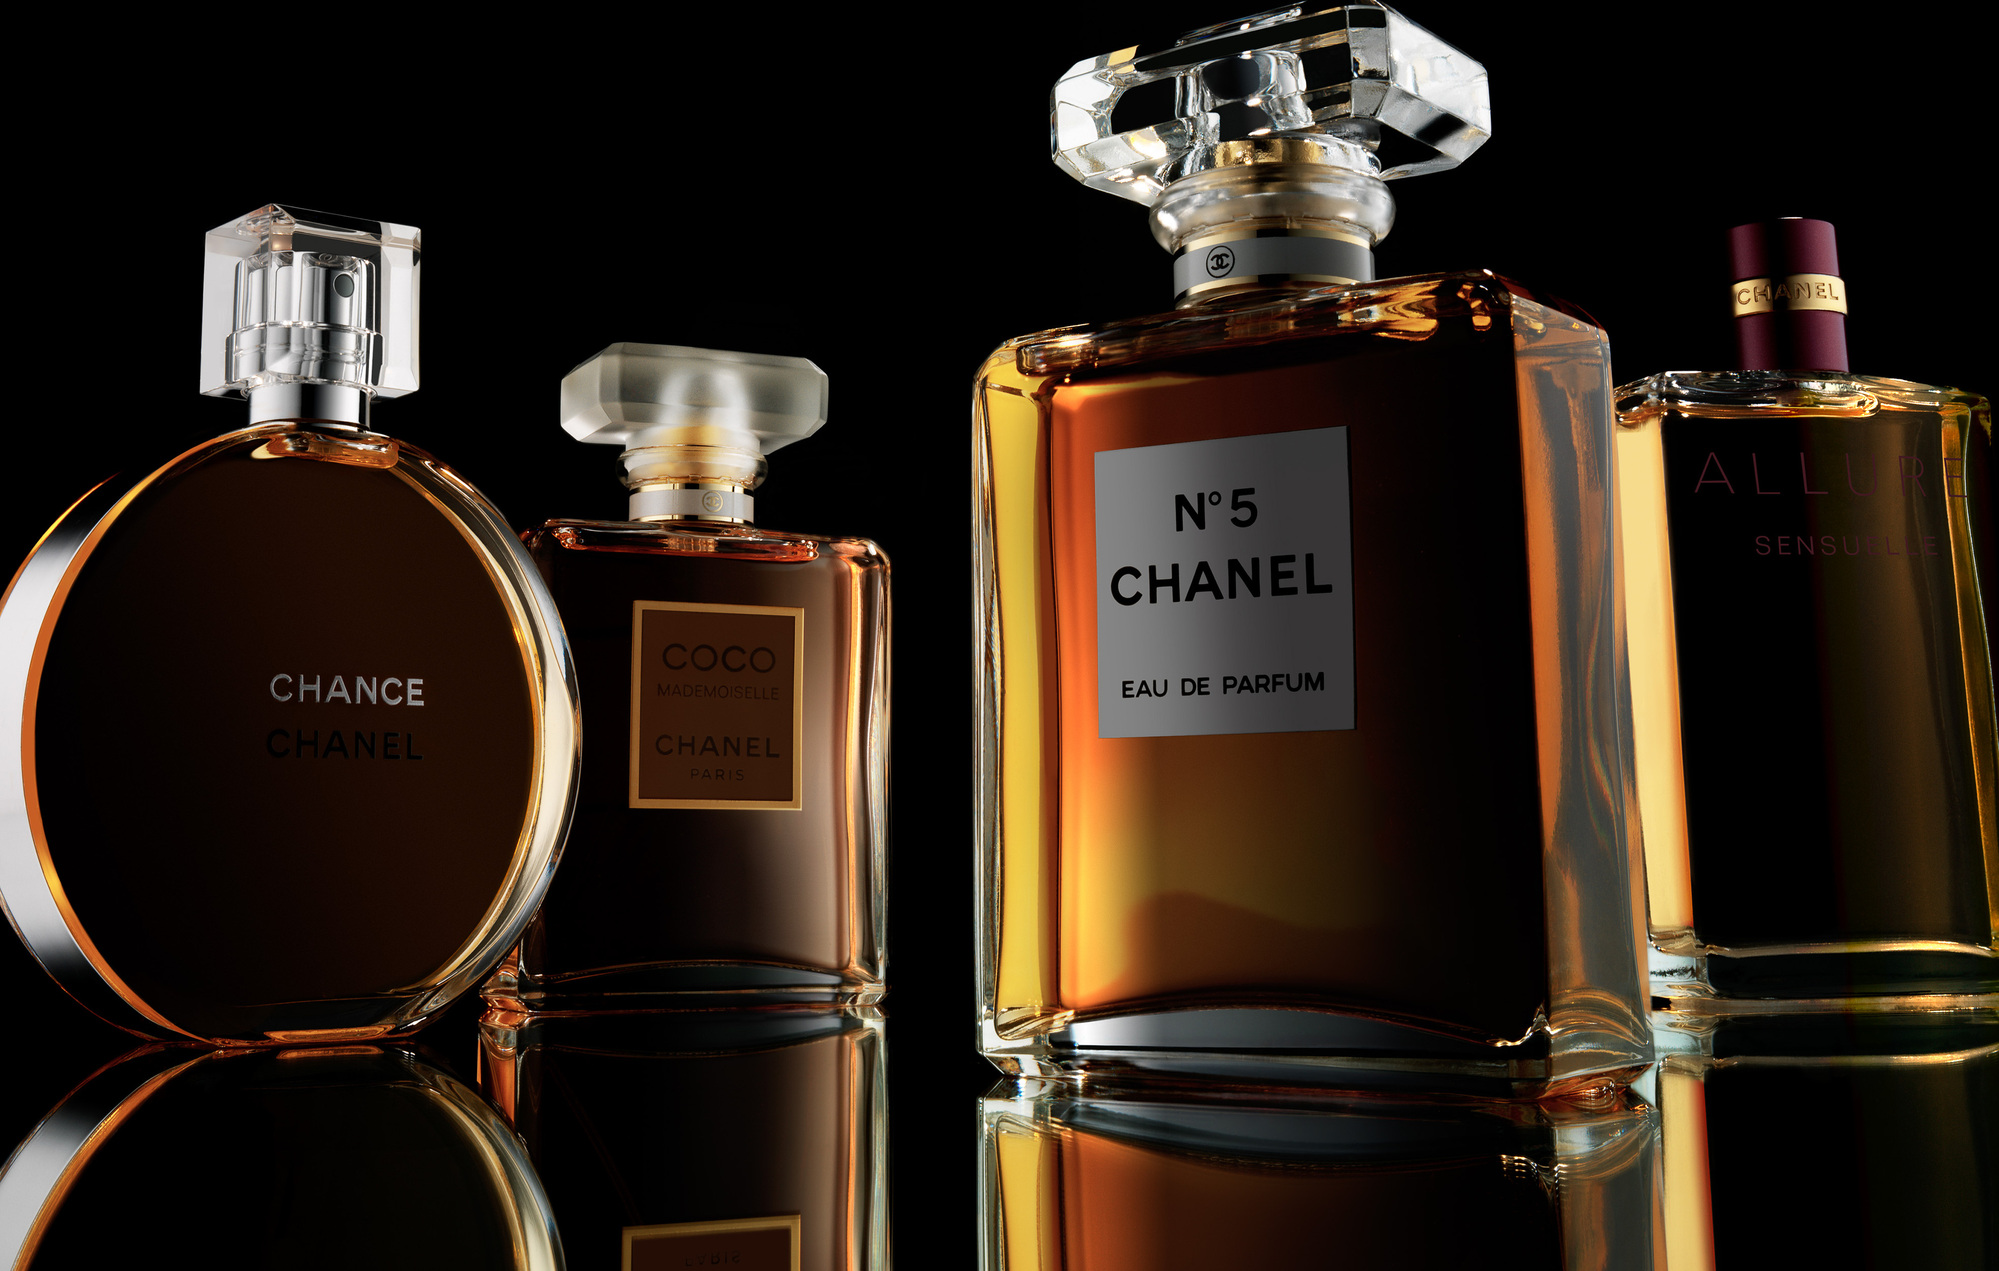 Chanel Perfume & Fragrance photography by commercial, product & advertising photographer Timothy Hogan in the Los Angeles Studio